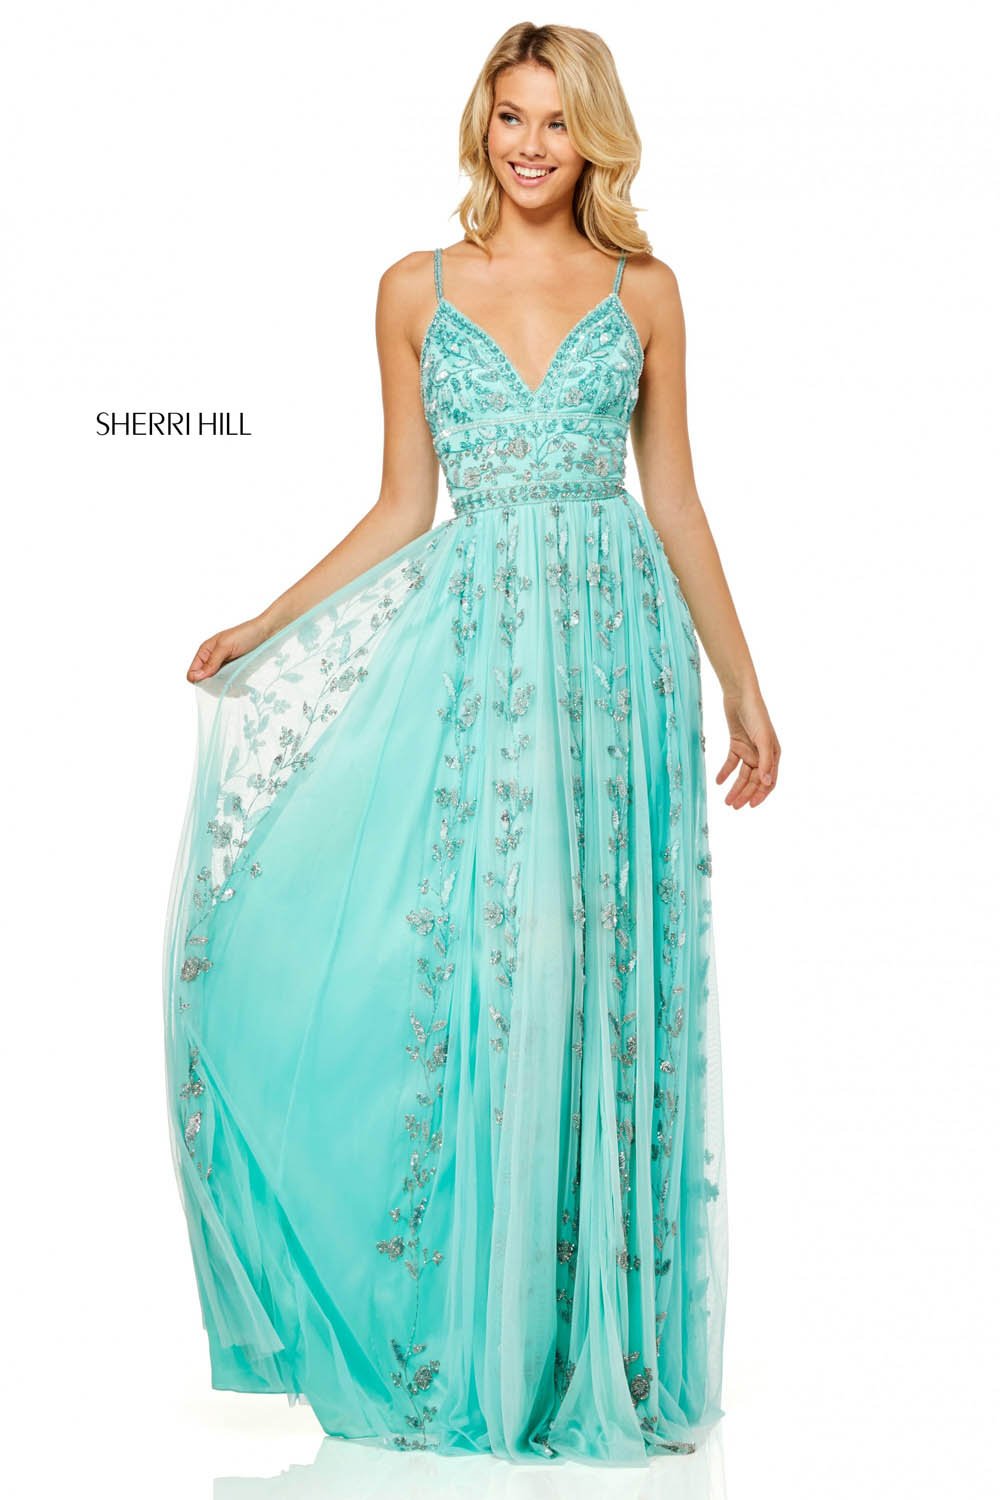 Sherri Hill 52461 dress images in these colors: Aqua, Yellow, Ivory, Light Pink, Light Blue.